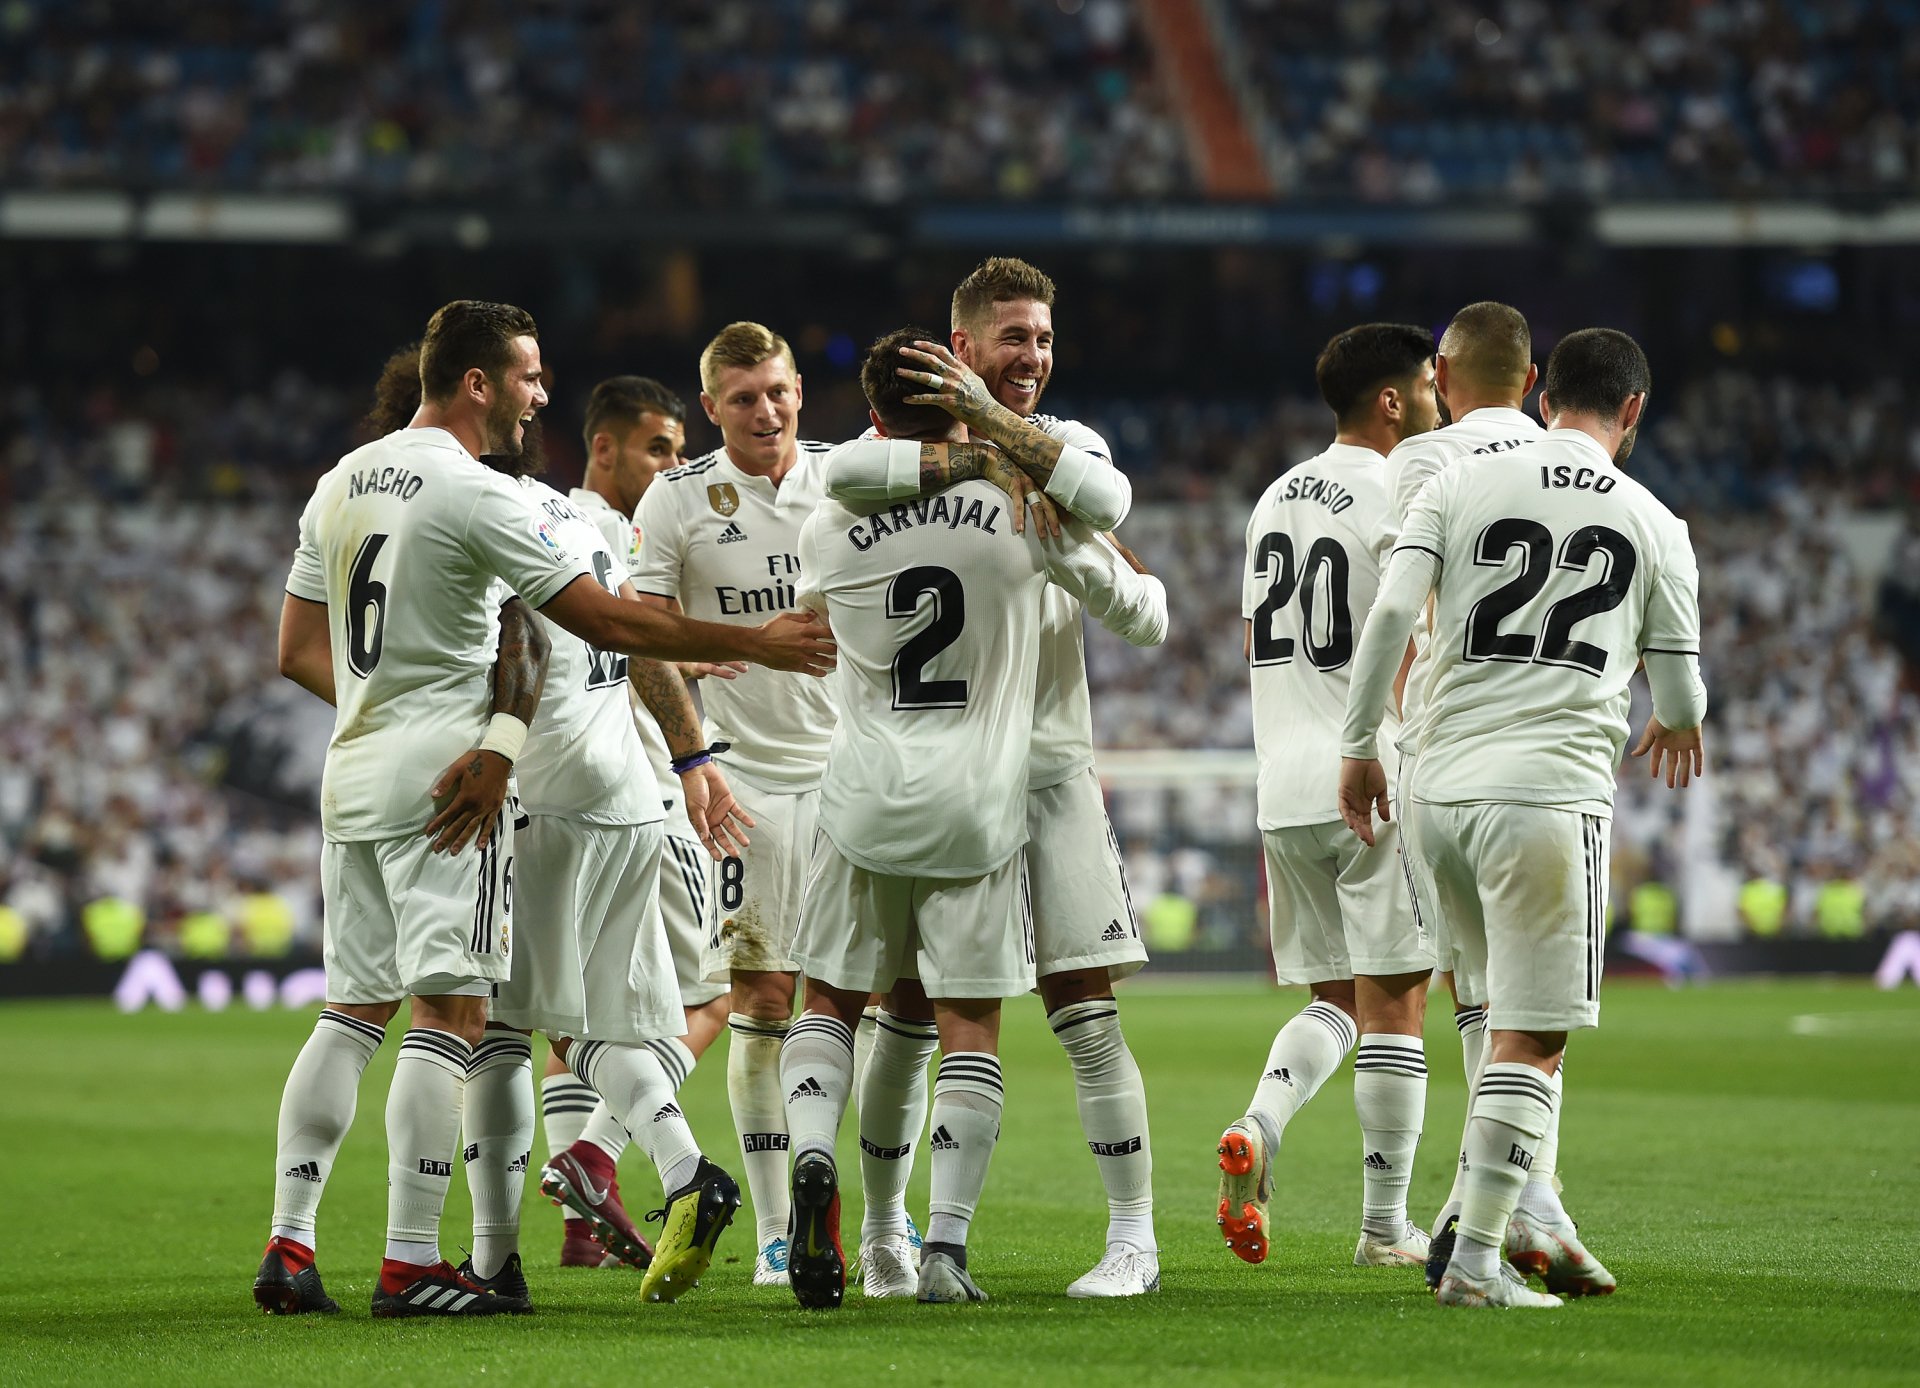 Real Madrid HD Wallpaper - Background Image - 3000x2169 - ID:958479 ...